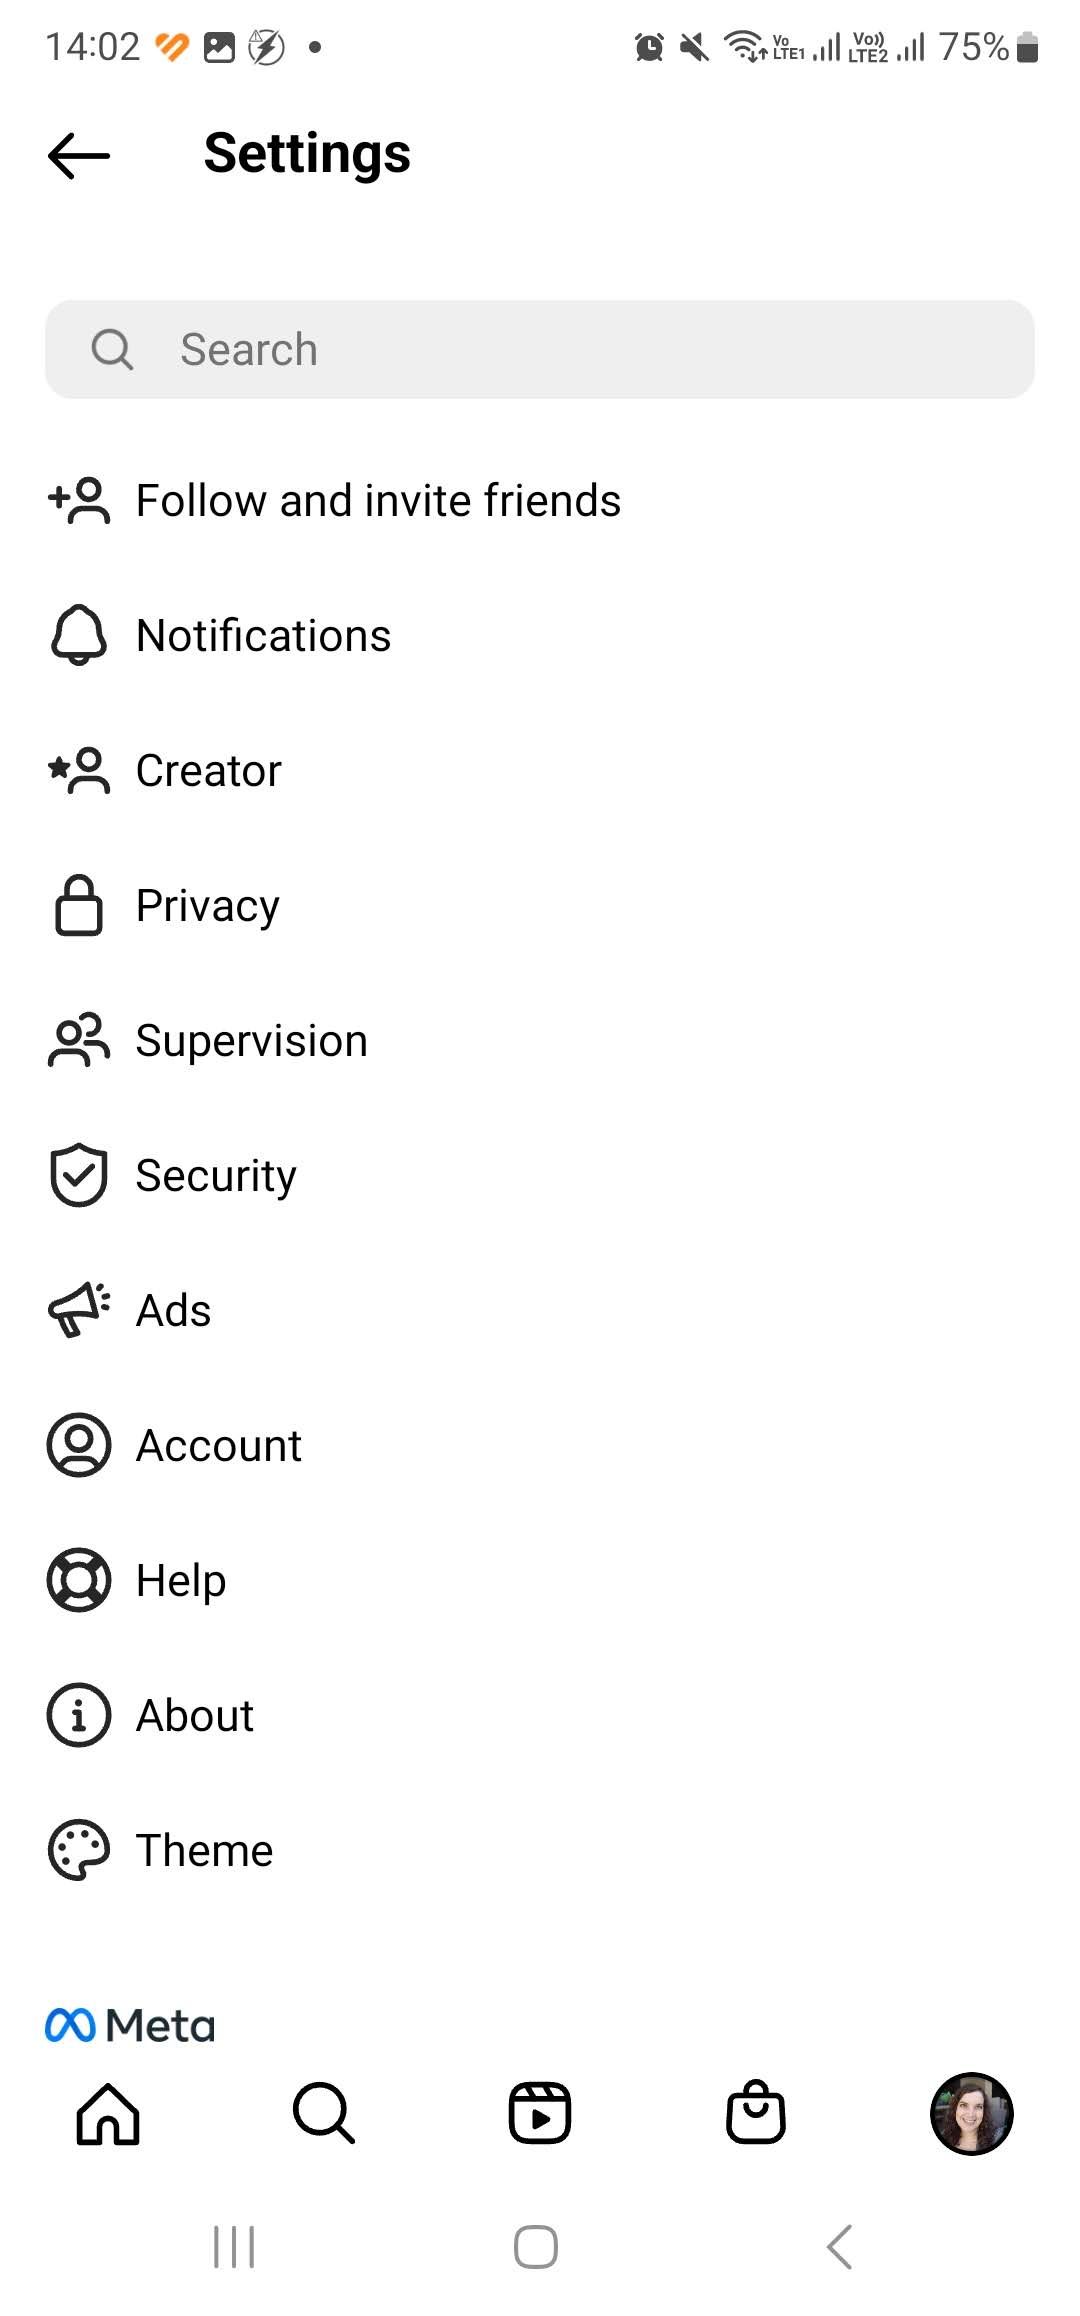 settings page with account option